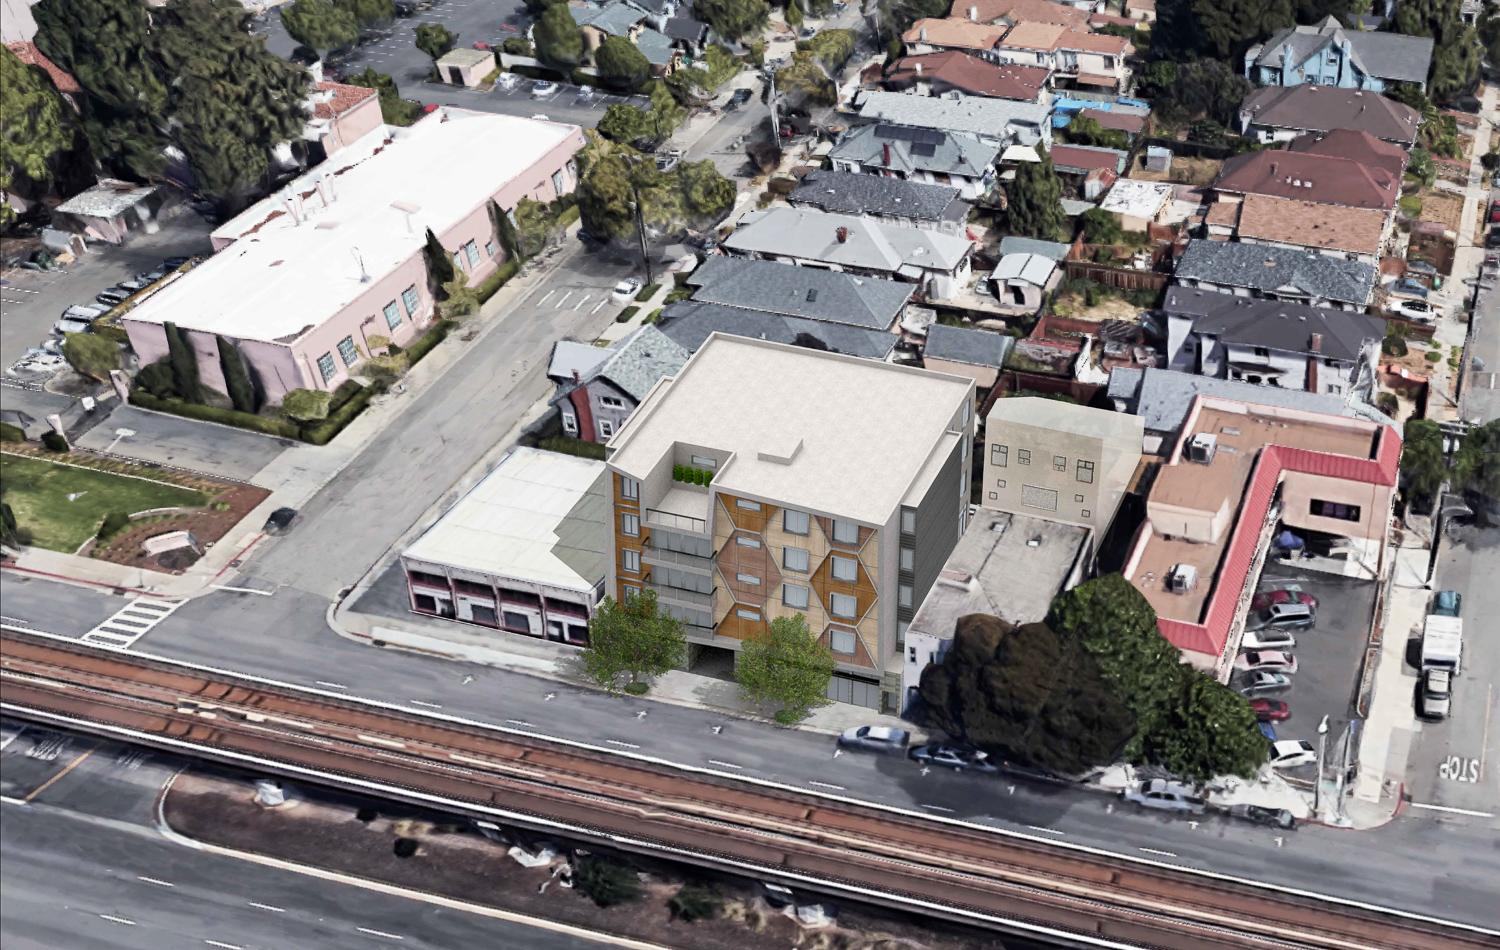 5622 Martin Luther King Jr aerial view, rendering by Gunkel Architecture